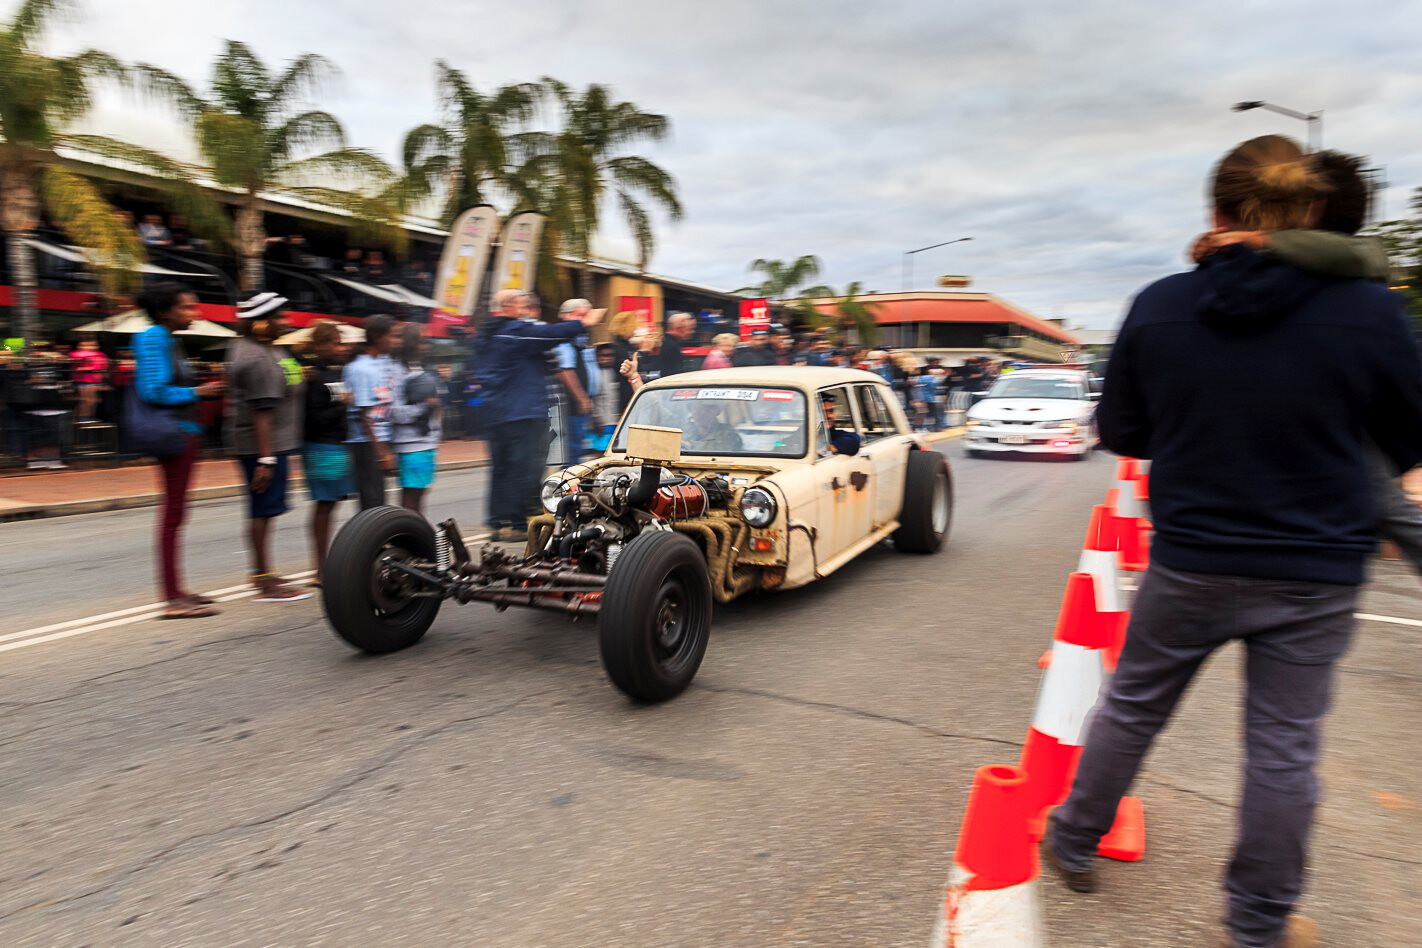 RED CENTRE NATS STREET CRUISE – VIDEO